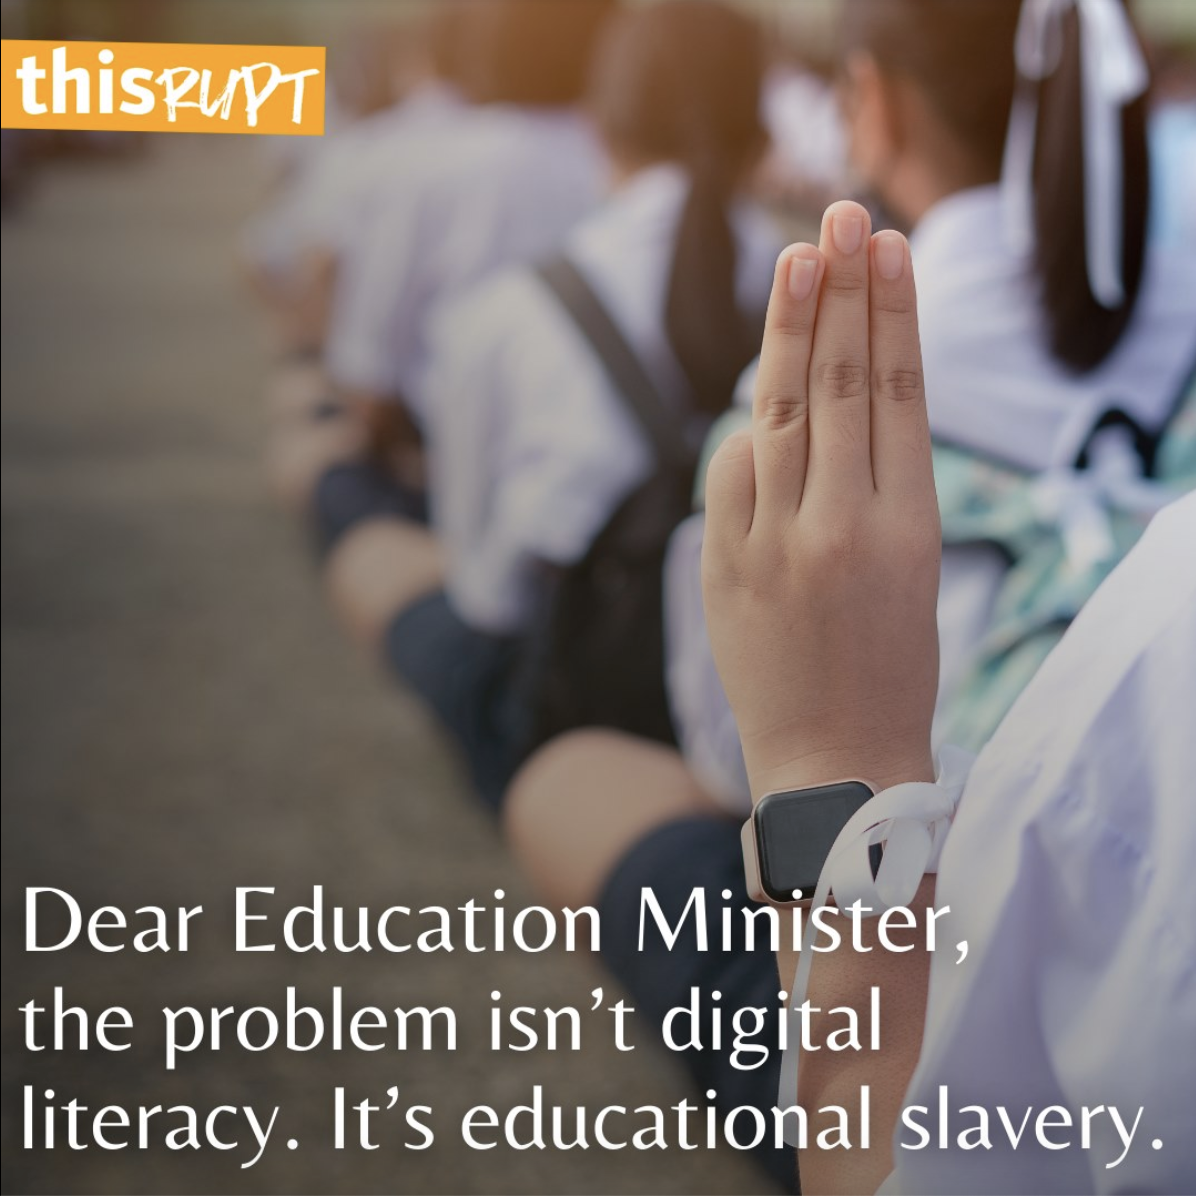 You don’t solve education slavery with digital literacy